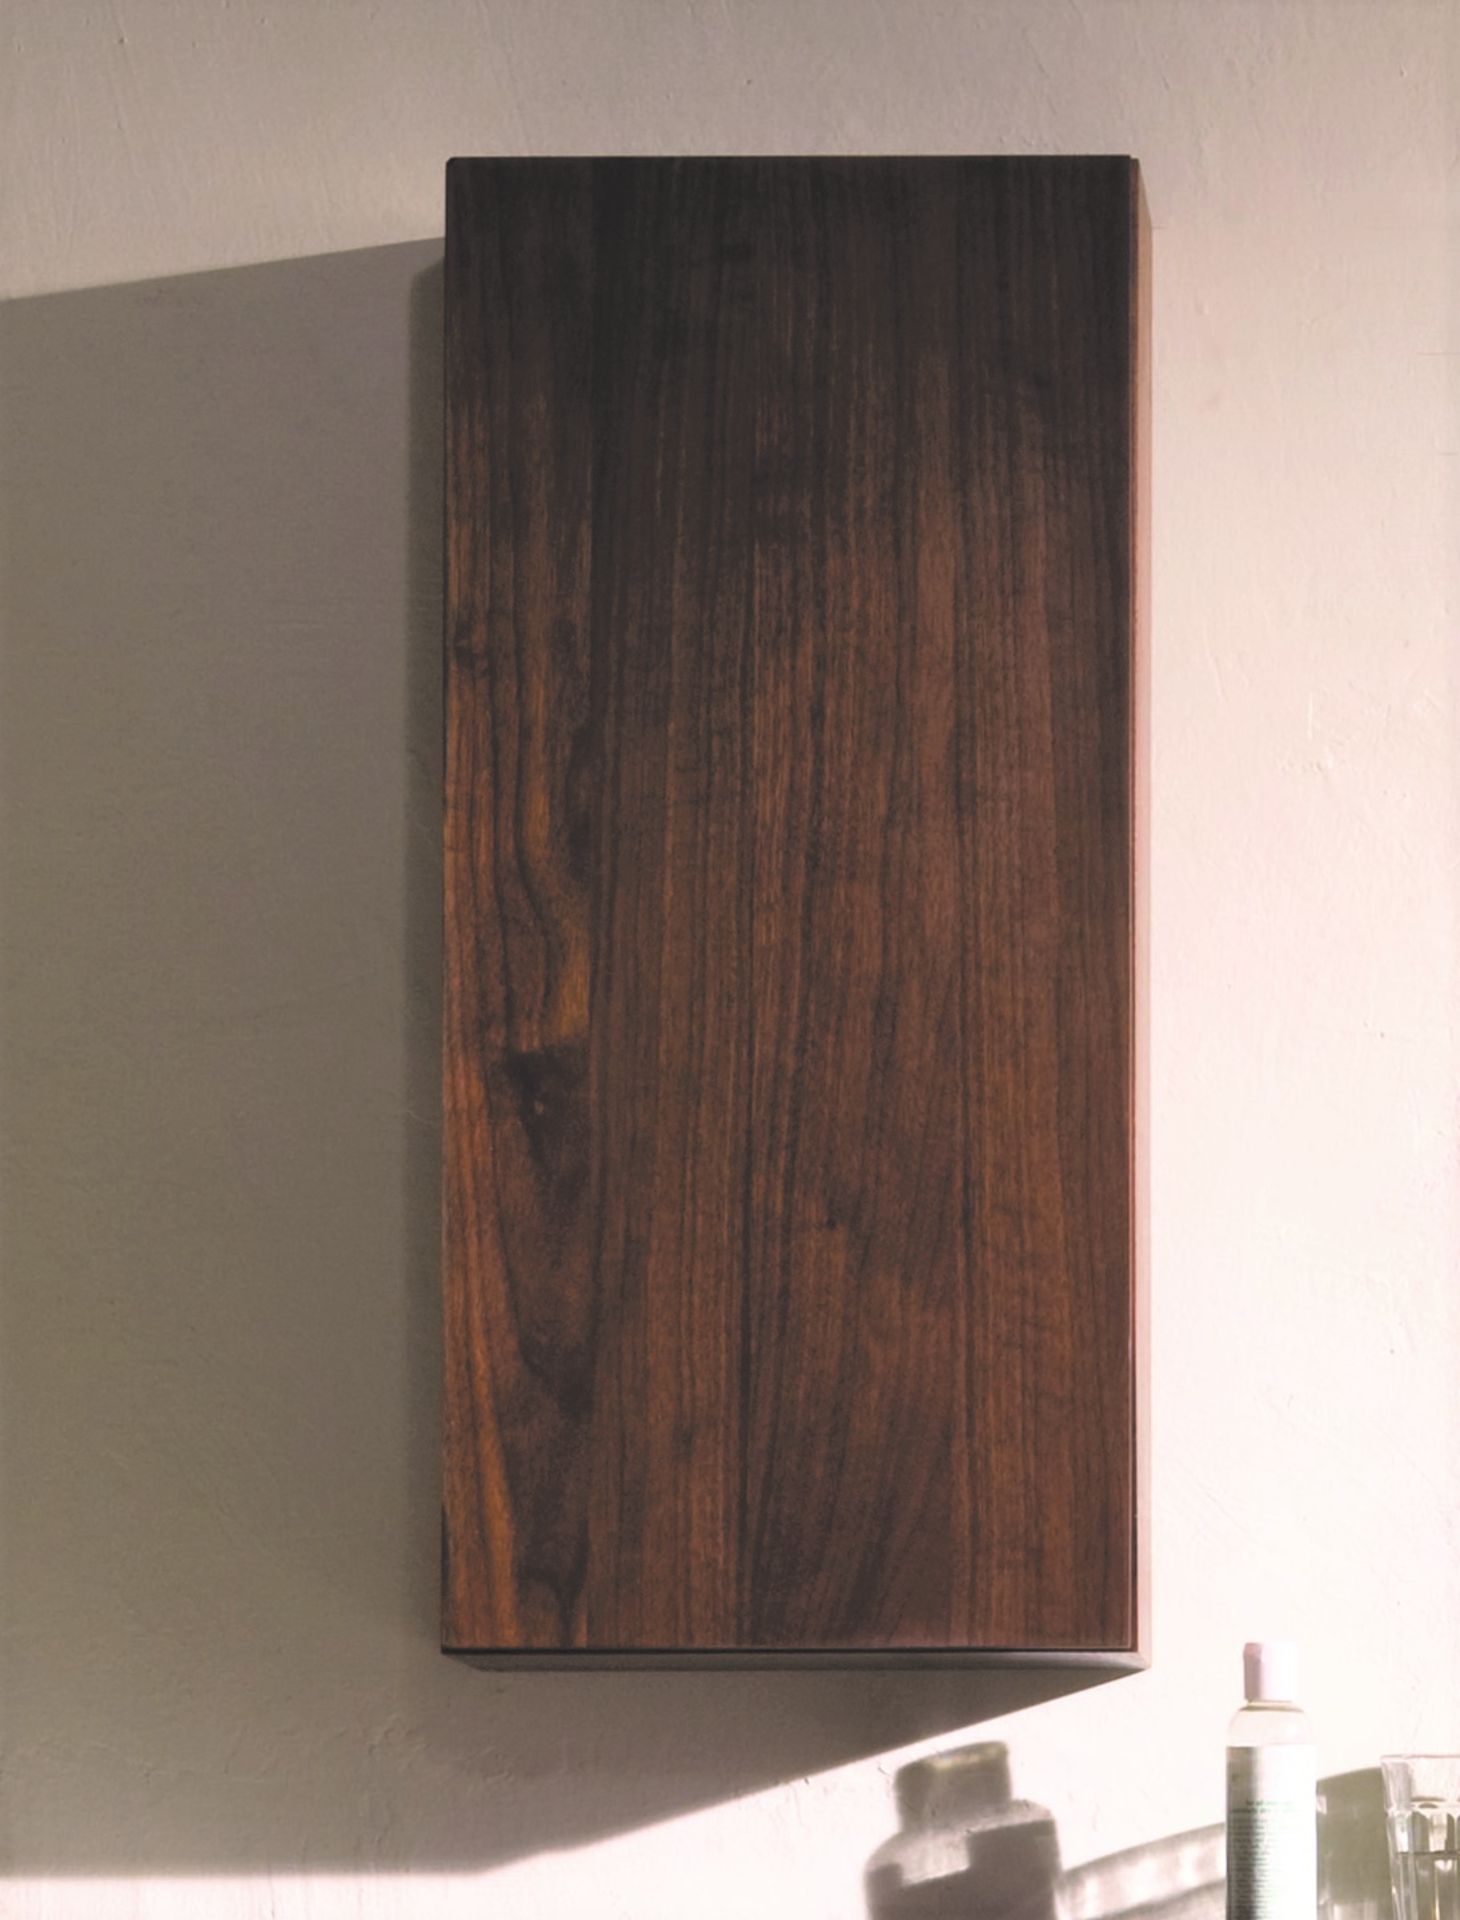 1 x Stonearth 300mm Wall Mounted Bathroom Storage Cabinet - American Solid Walnut - RRP £300 - Image 2 of 12